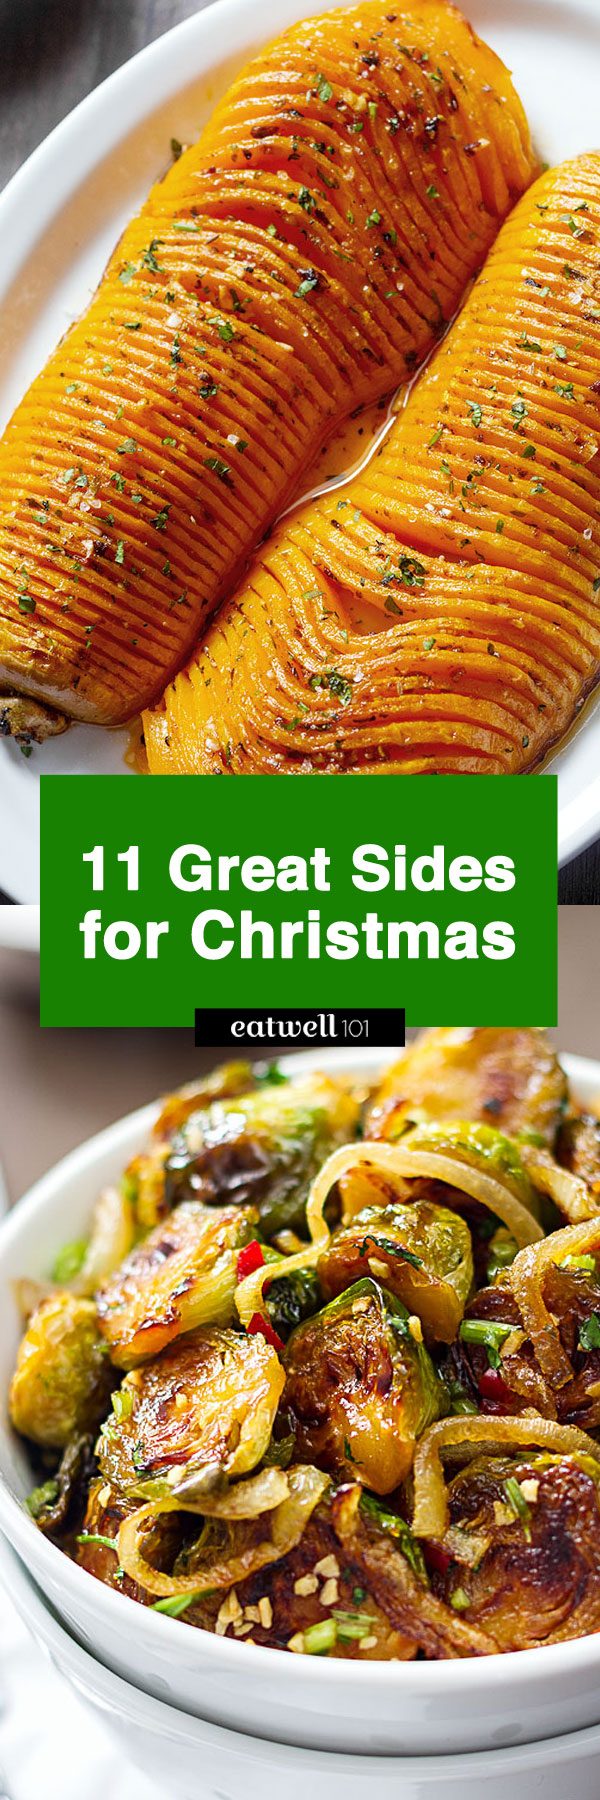 19 Superb Side Dish Ideas for Your Christmas Menu — Eatwell101